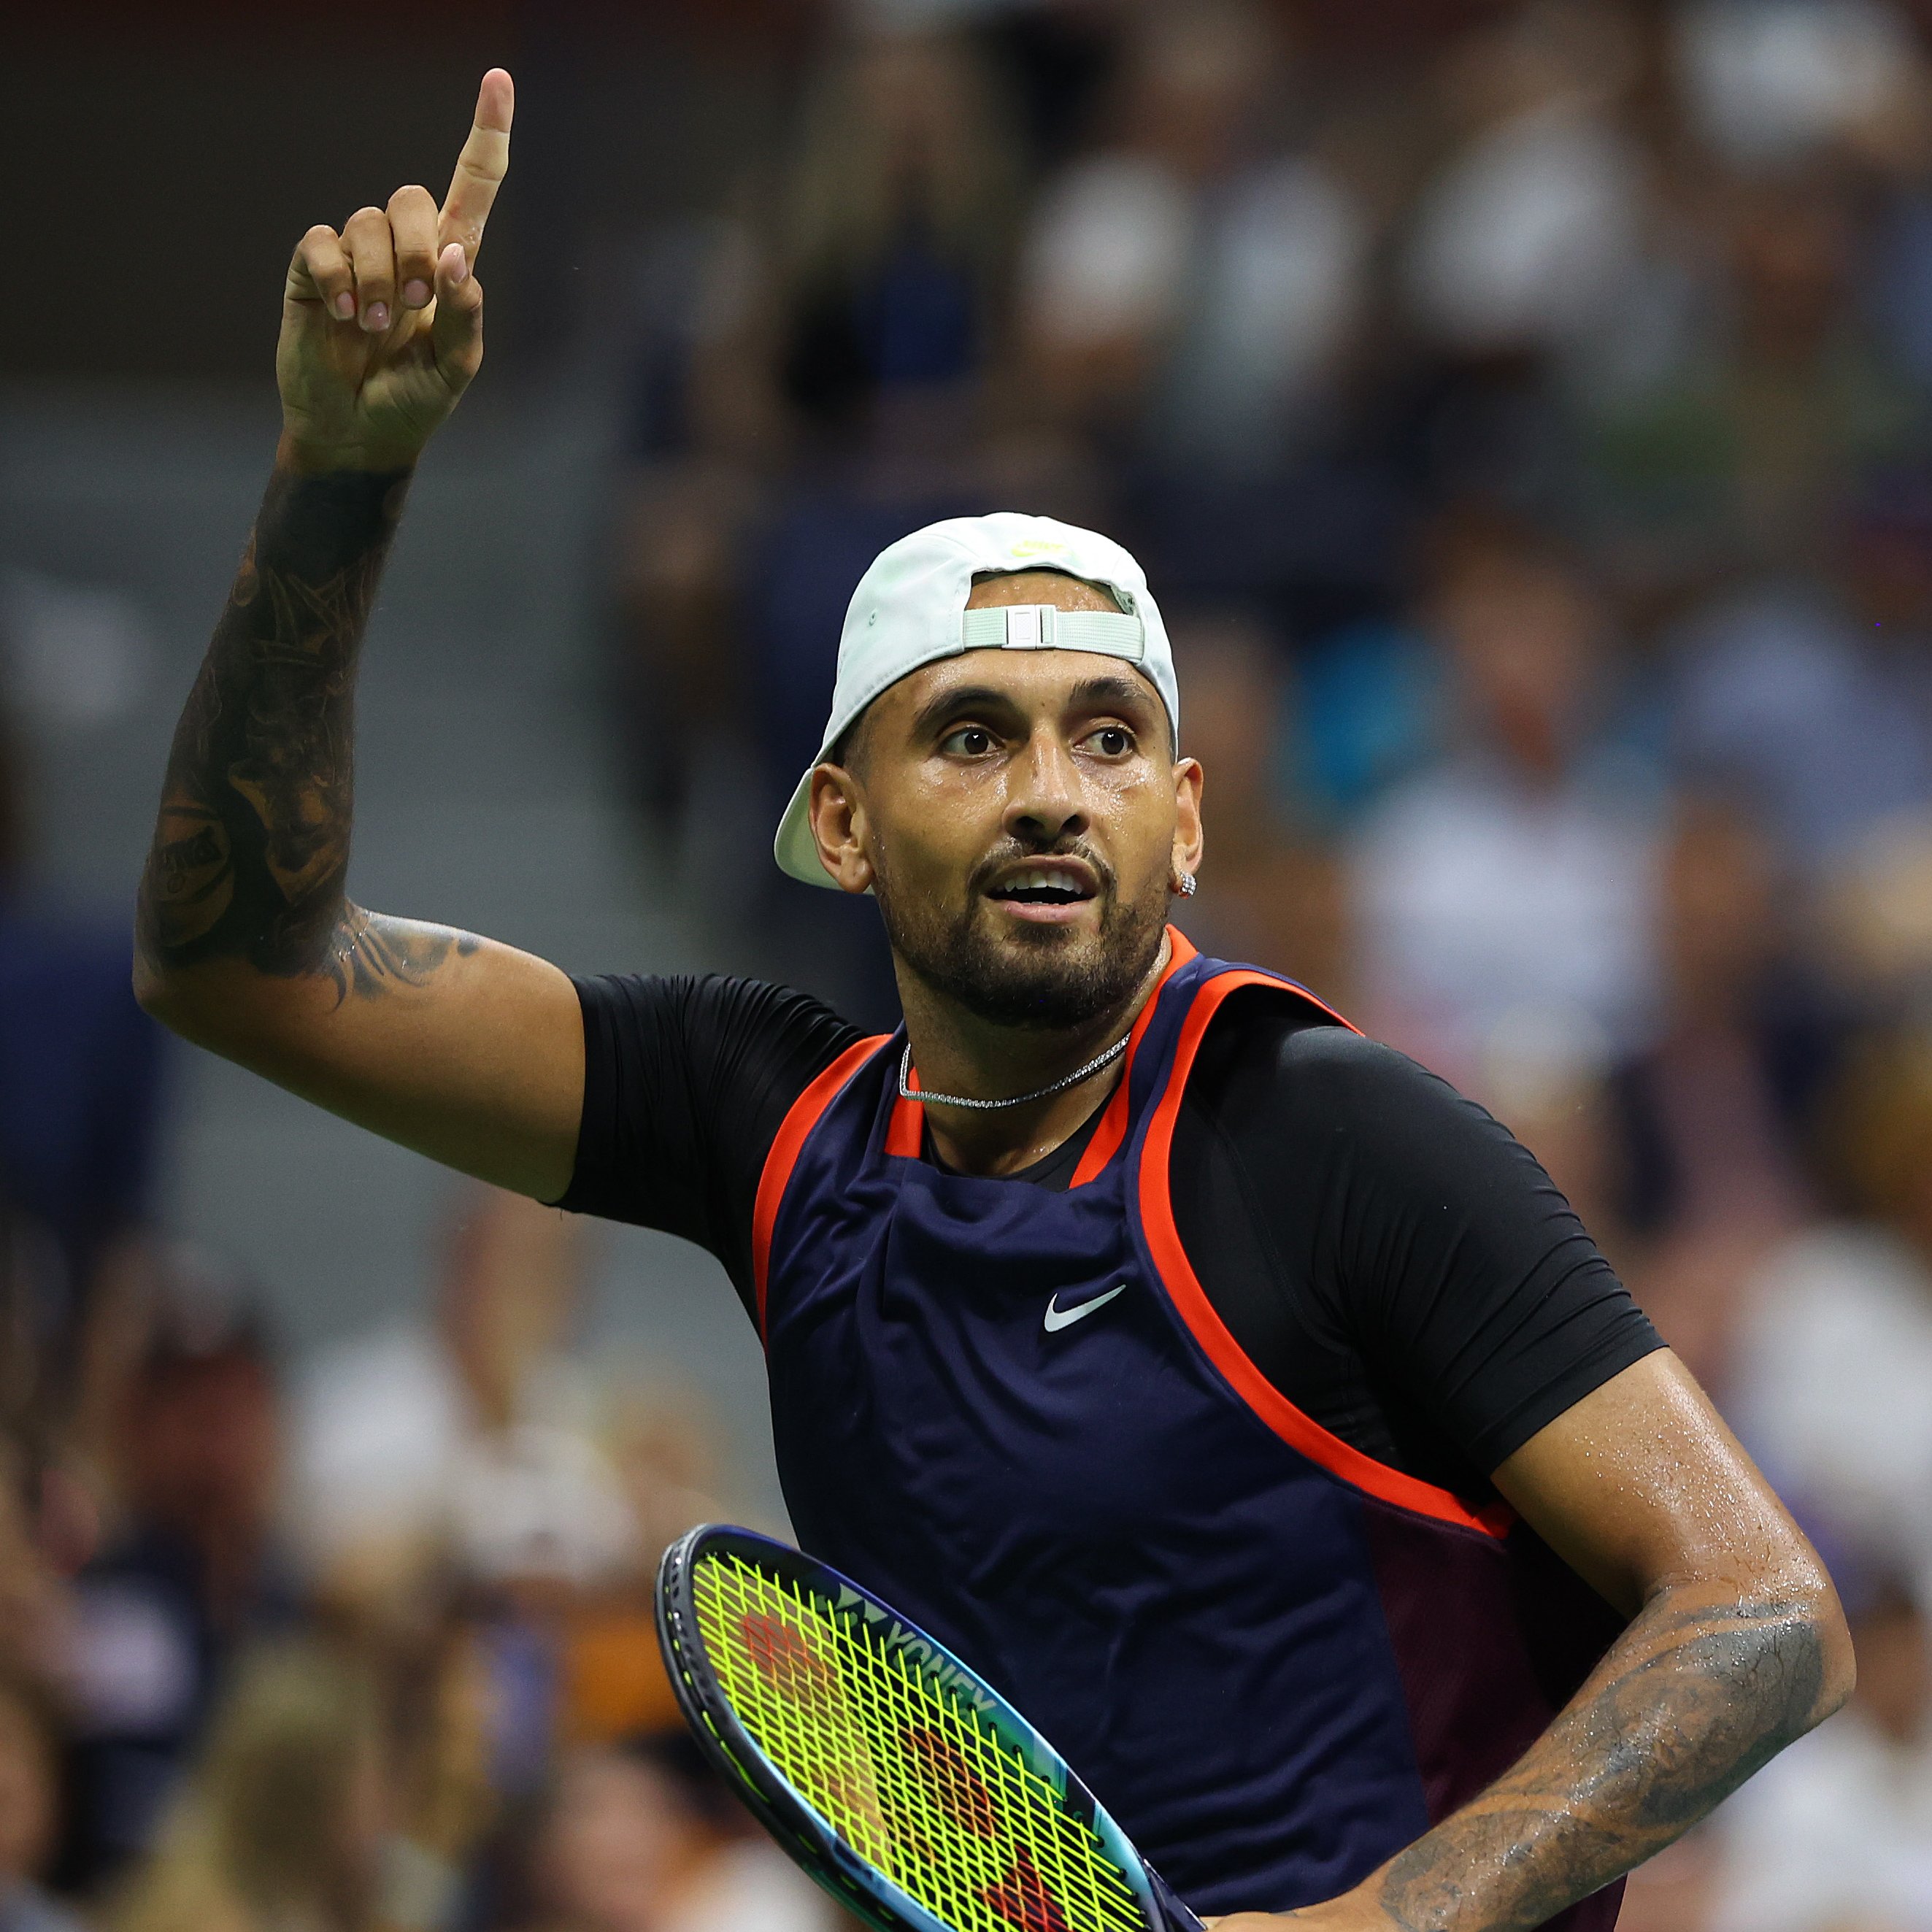 TennisAustralia on Twitter: "Into his first #USOpen quarterfinal and  defeating the world No.1 on the way ☝️ Kyrgios beats defending champion  Daniil Medvedev 7-6(11) 3-6 6-3 6-2 to move into the final